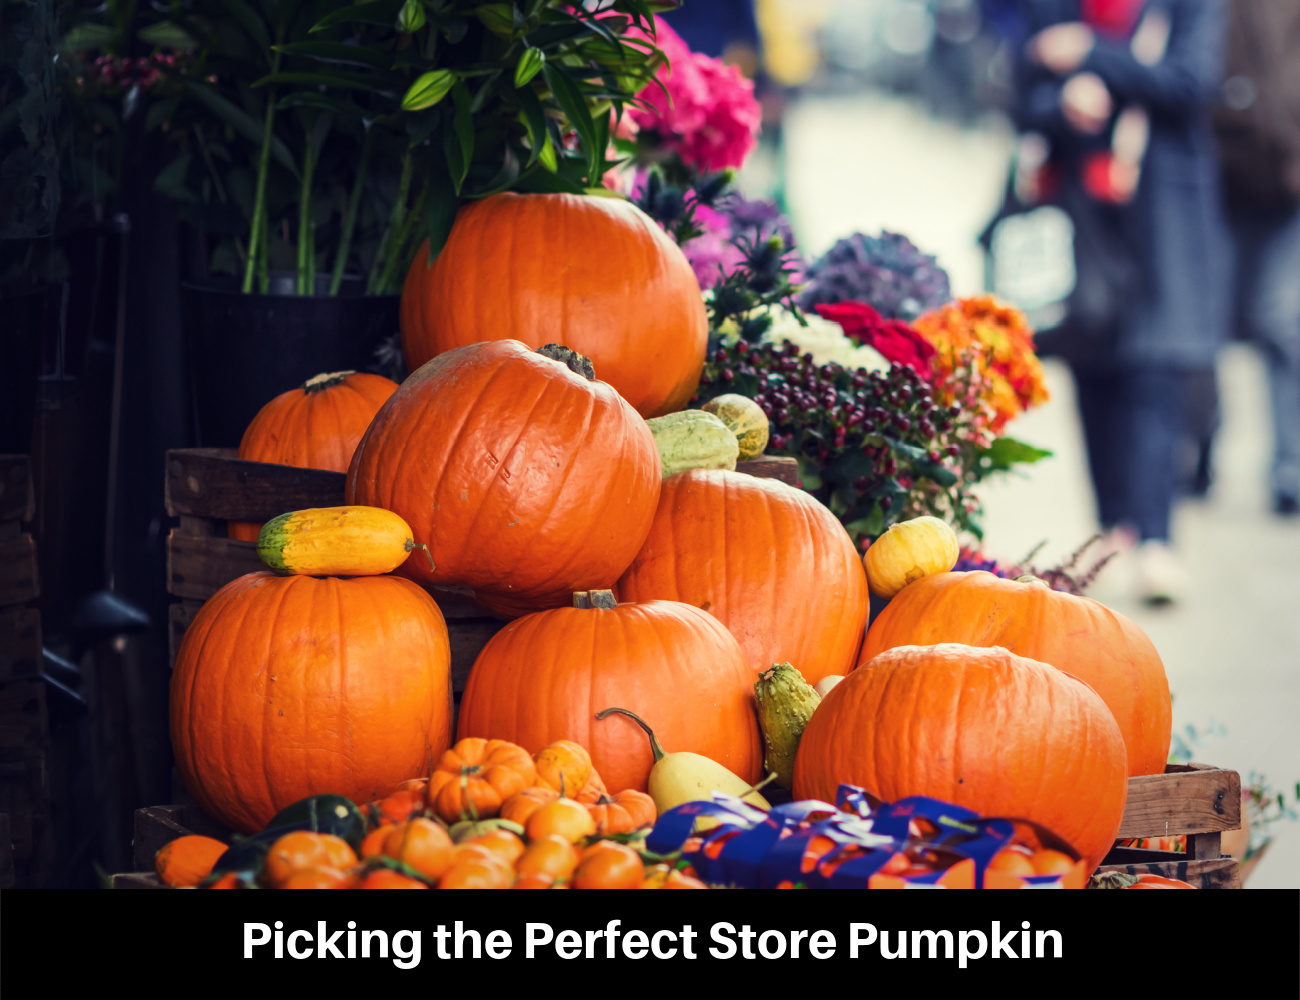 Picking the Perfect Store Pumpkin